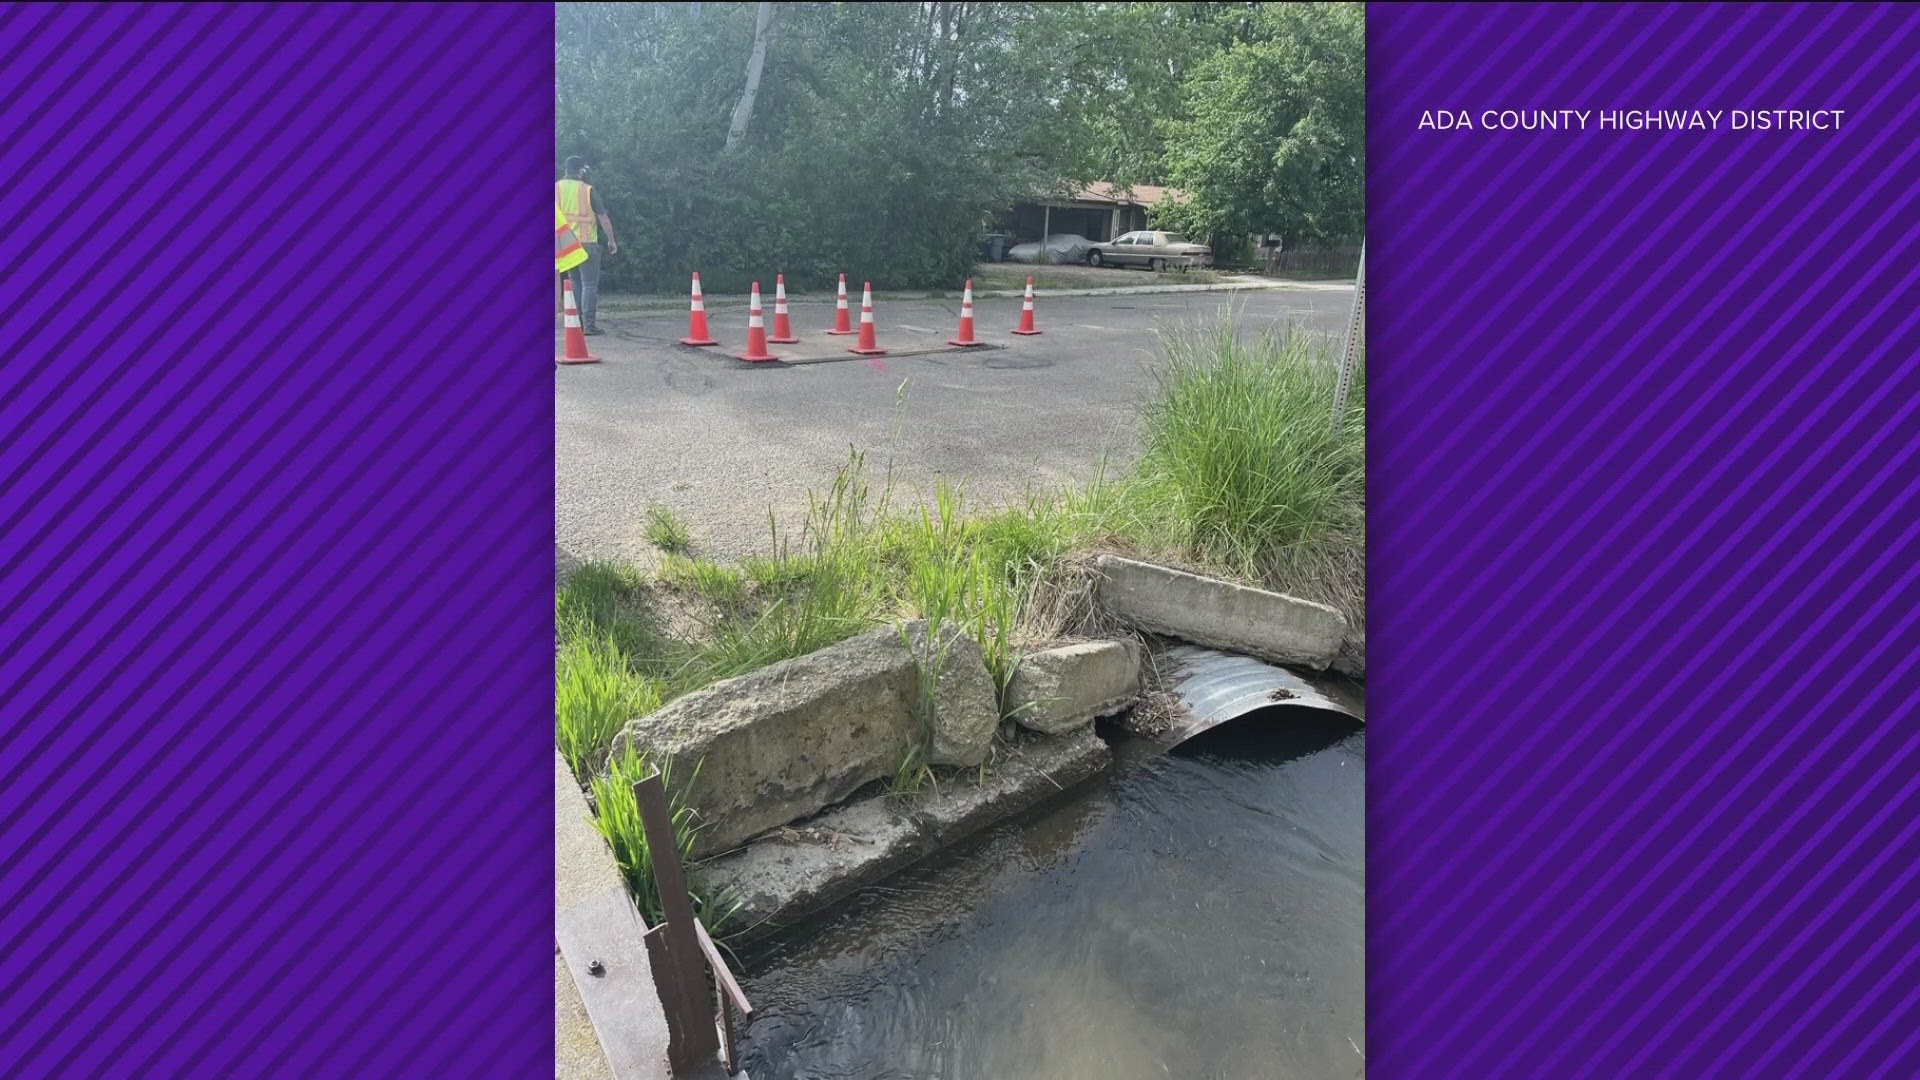 A failing irrigation pipe caused a sinkhole at Garrett Street, north of Marigold Street. Ada county highway district crews are working to fix the hole.